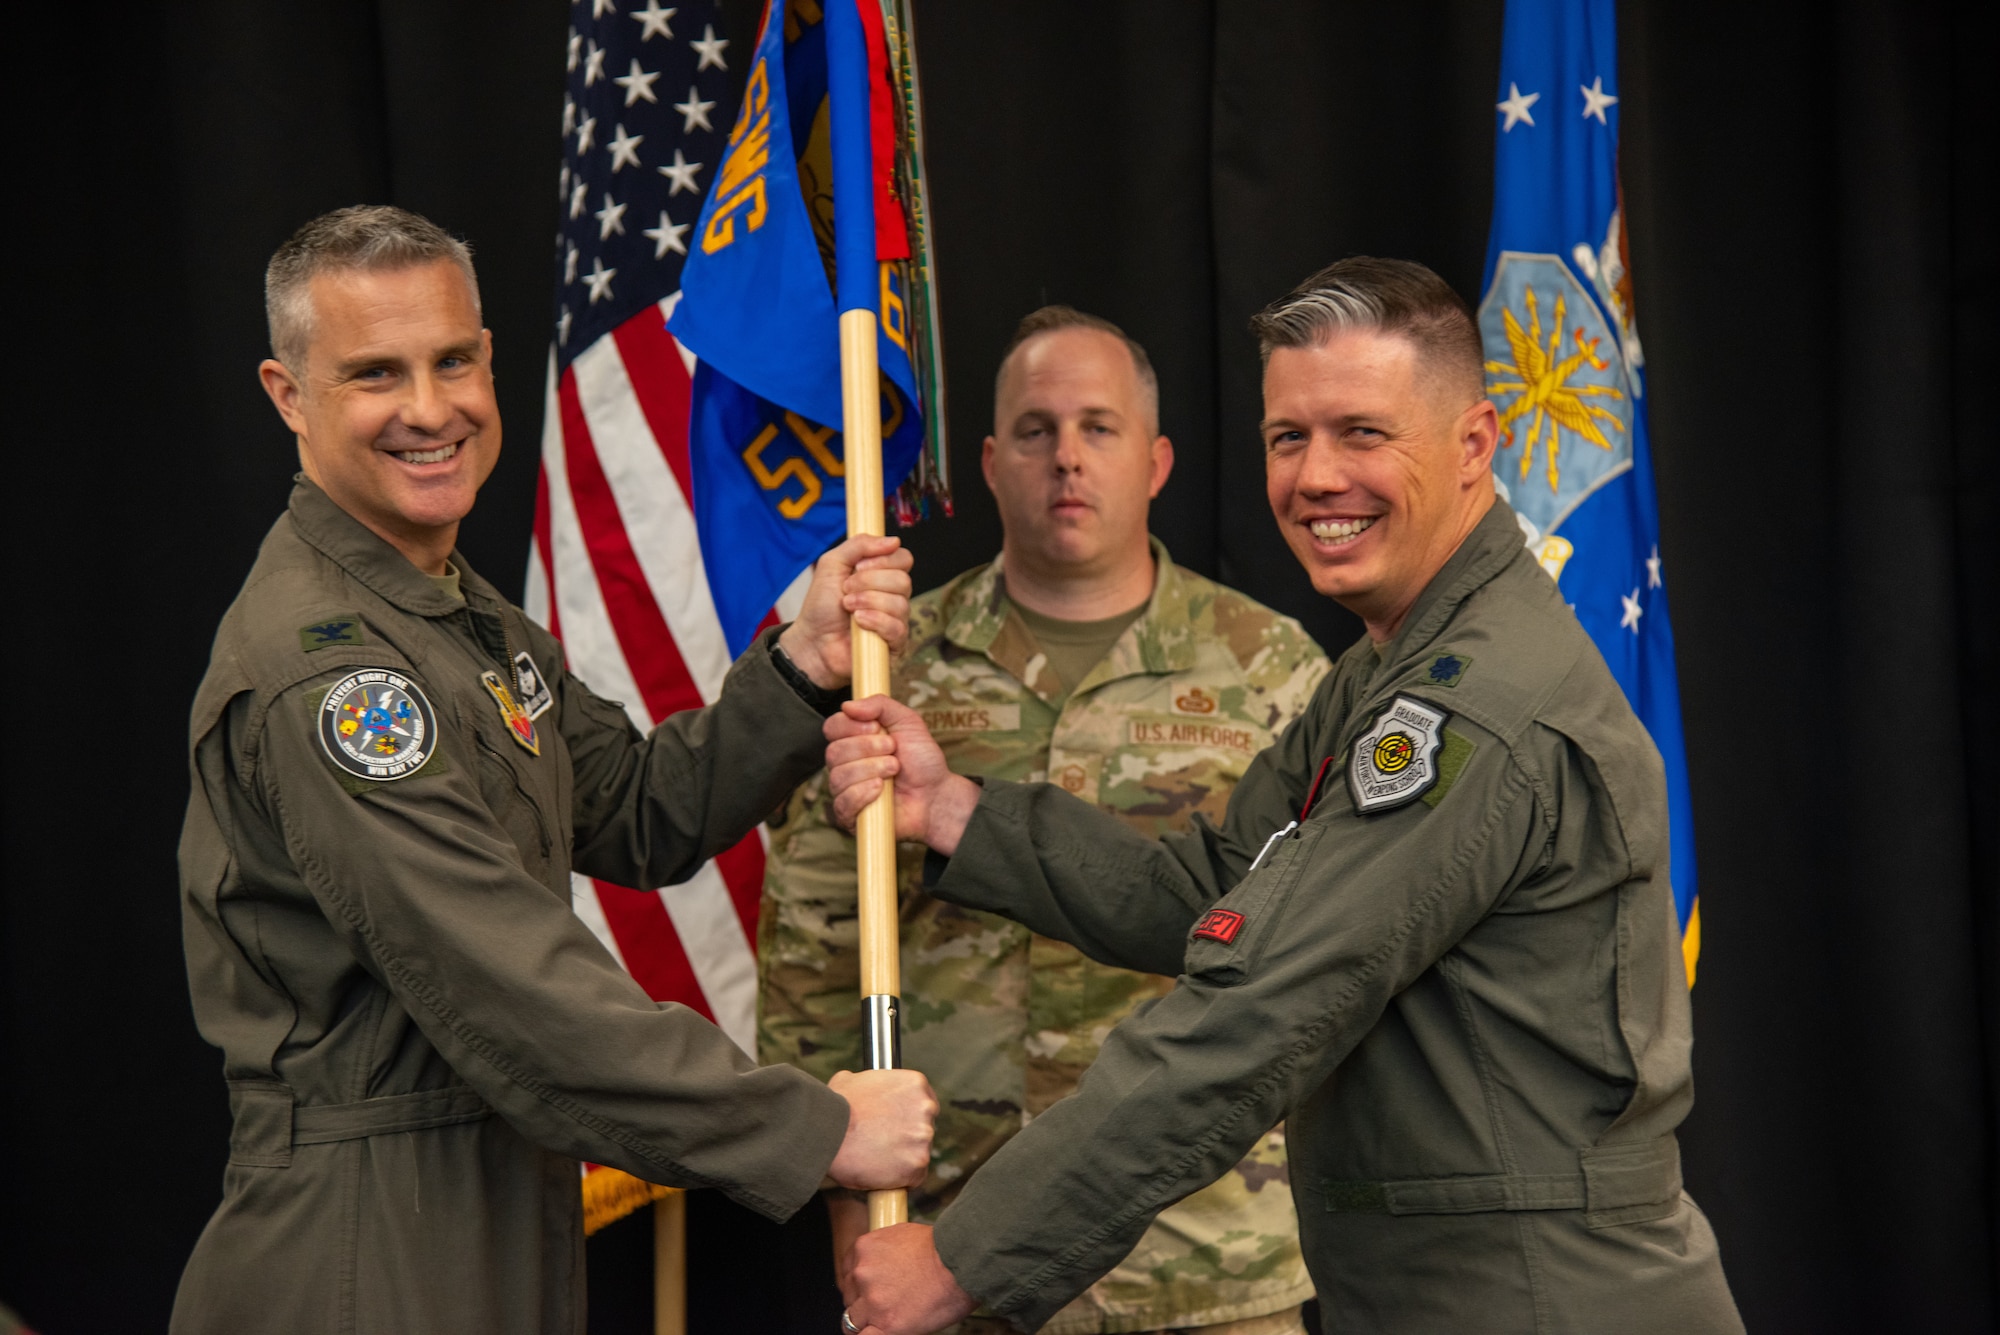 U.S. Air Force Col. Andrew J. Finkler, 850th Spectrum Warfare Group commander, left, and U.S. Air Force Lt. Col. Charles A. Friesz, 563rd Electronic Warfare Squadron commander, pass the guidon for 563rd EWS to signify Friesz’ assumption of command during the unit’s reactivation ceremony, San Antonio, Texas, April 25, 2024. The 563rd EWS remained inactive for 14 years before reactivating today as a software development organization based in 21st-century processes, practices and technologies. (U.S. Air Force photo by Jarrod M. Vickers)